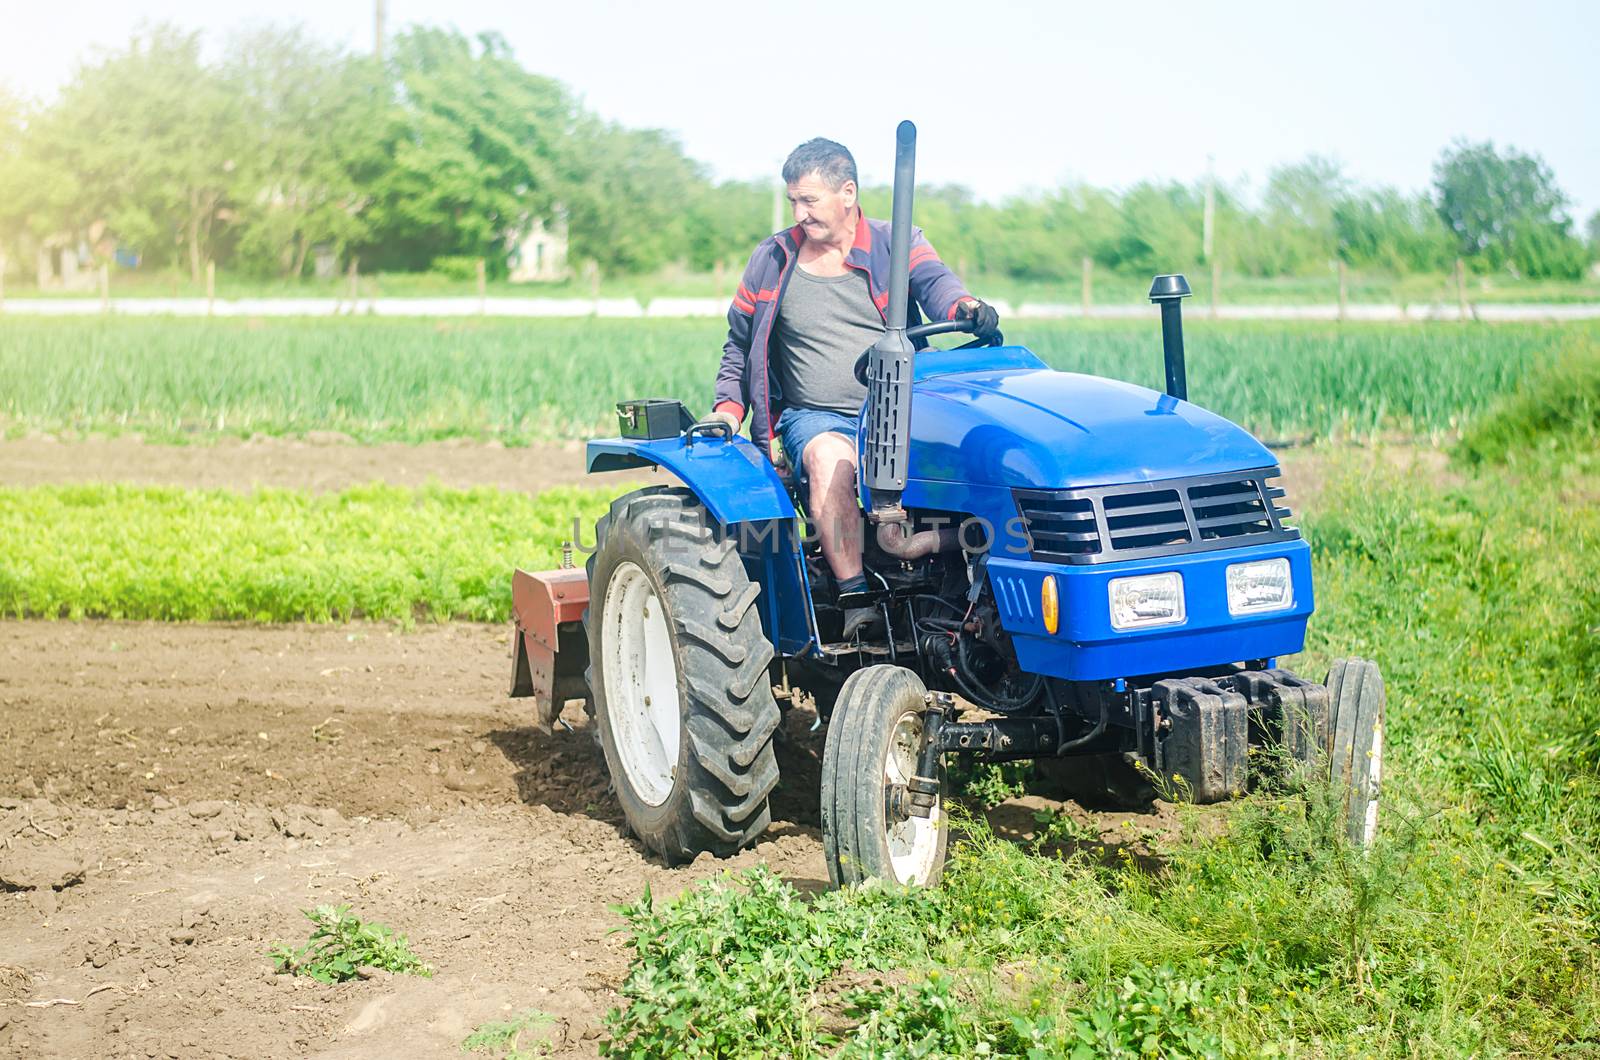 A farmer drives a tractor while working on a farm field. Loosening surface, cultivating the land. Farming, agriculture. Field preparation. Use of agricultural machinery and equipment to speed up work.